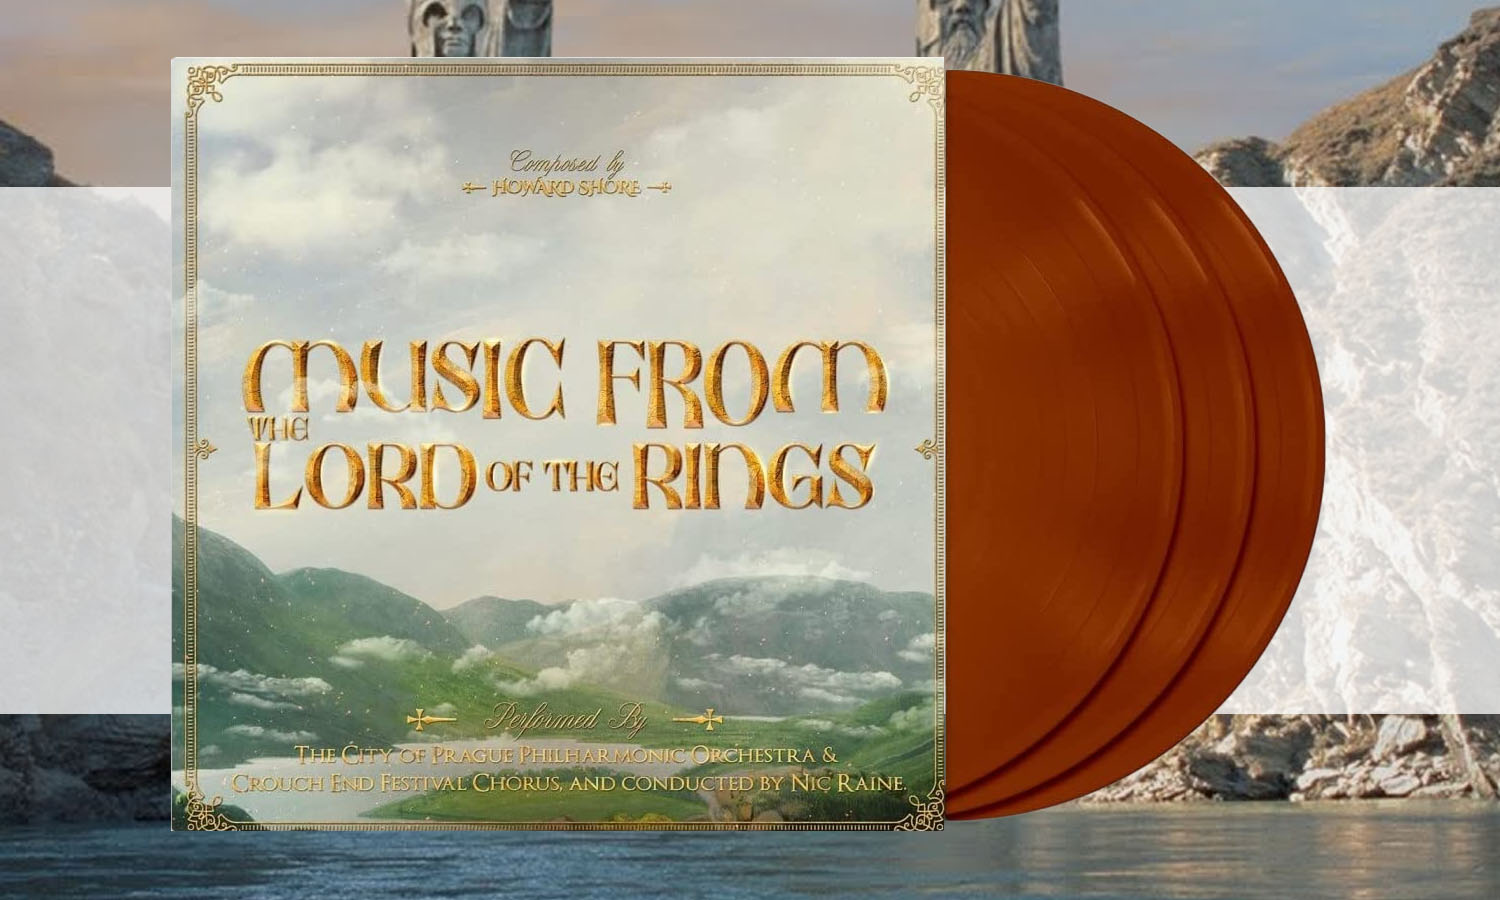 slider vinyle the lord of the rings edition limitée prague